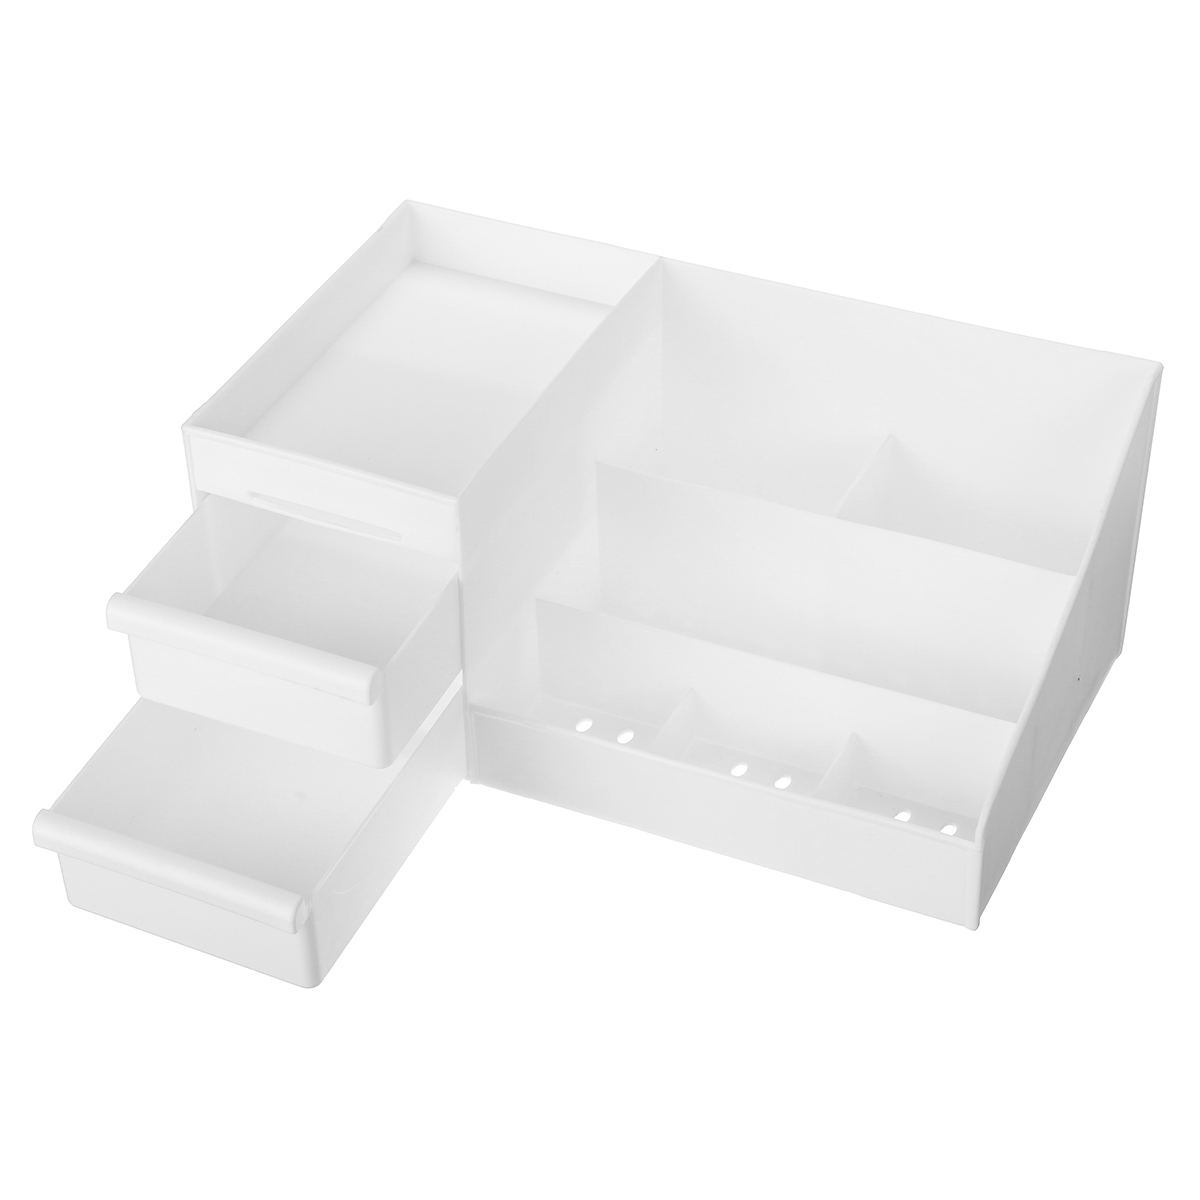 Plastic-Cosmetic-Makeup-Storage-Box-Organizer-Case-Holder-Jewelry-with-Drawer-1700918-6